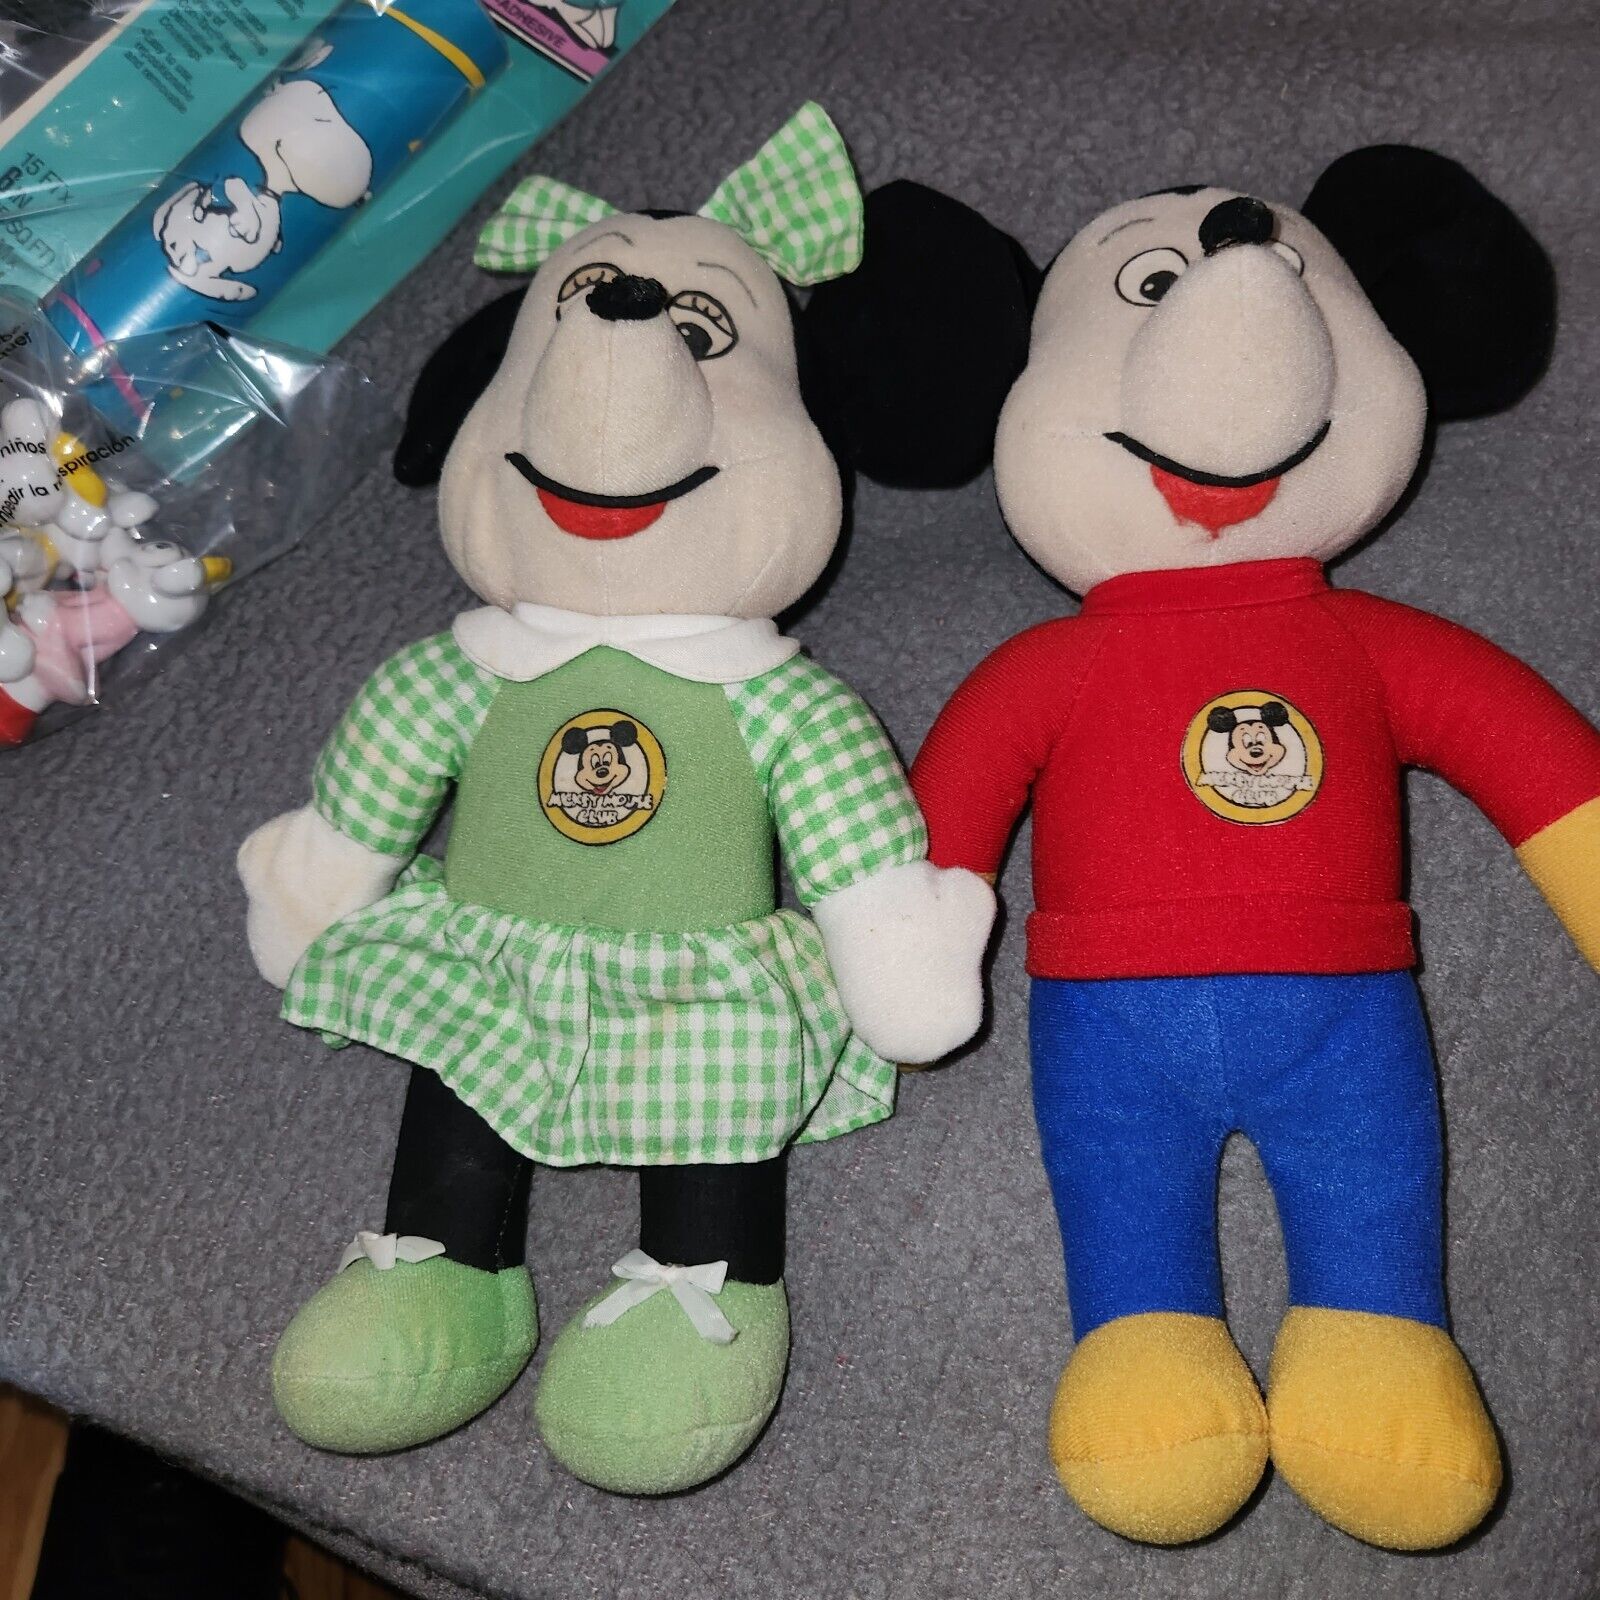 Vintage 70’s Knickerbocker Mickey & Minnie Mouse plush, Mickey Mouse clubhouse